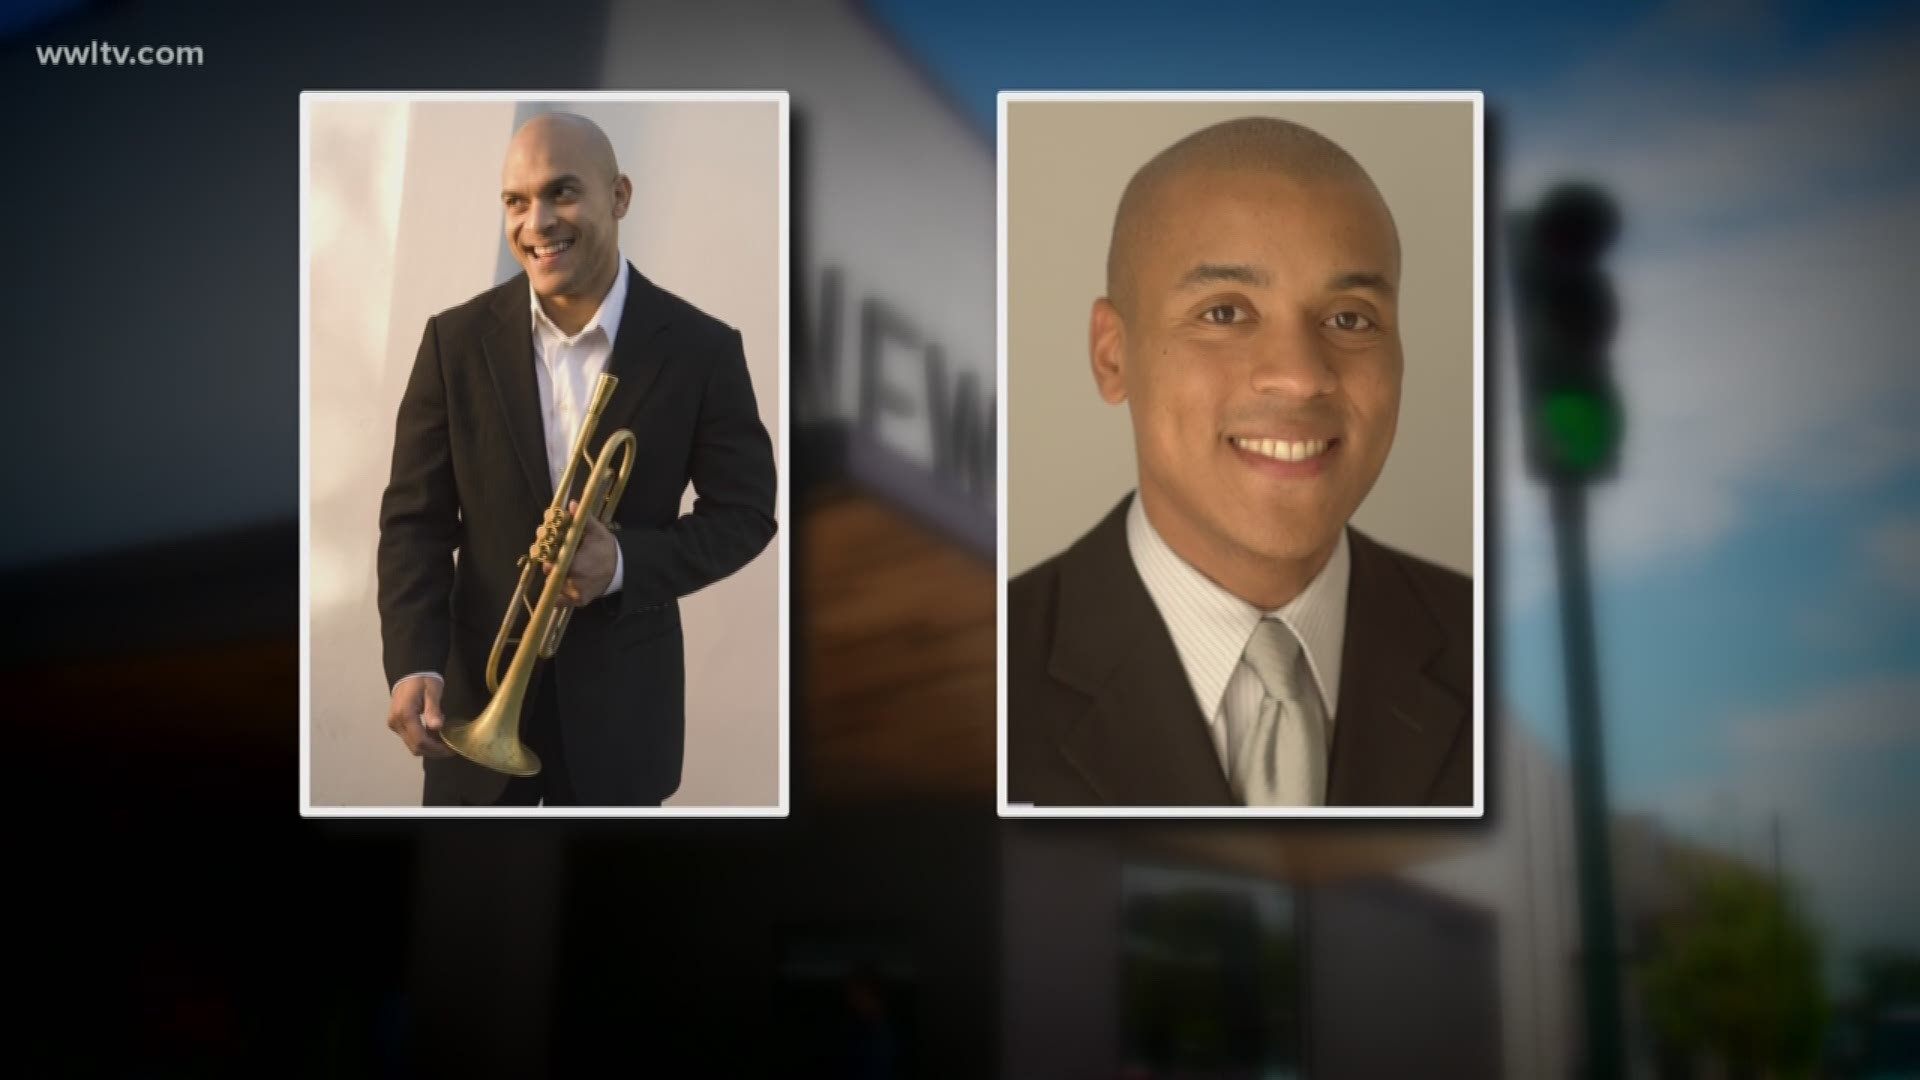 As a follow up to a David Hammer investigation that started in 2015, Grammy-Award winner Irvin Mayfield and his business partner Ronald Markham were in federal court for a third time Monday, and once again entered not-guilty pleas.